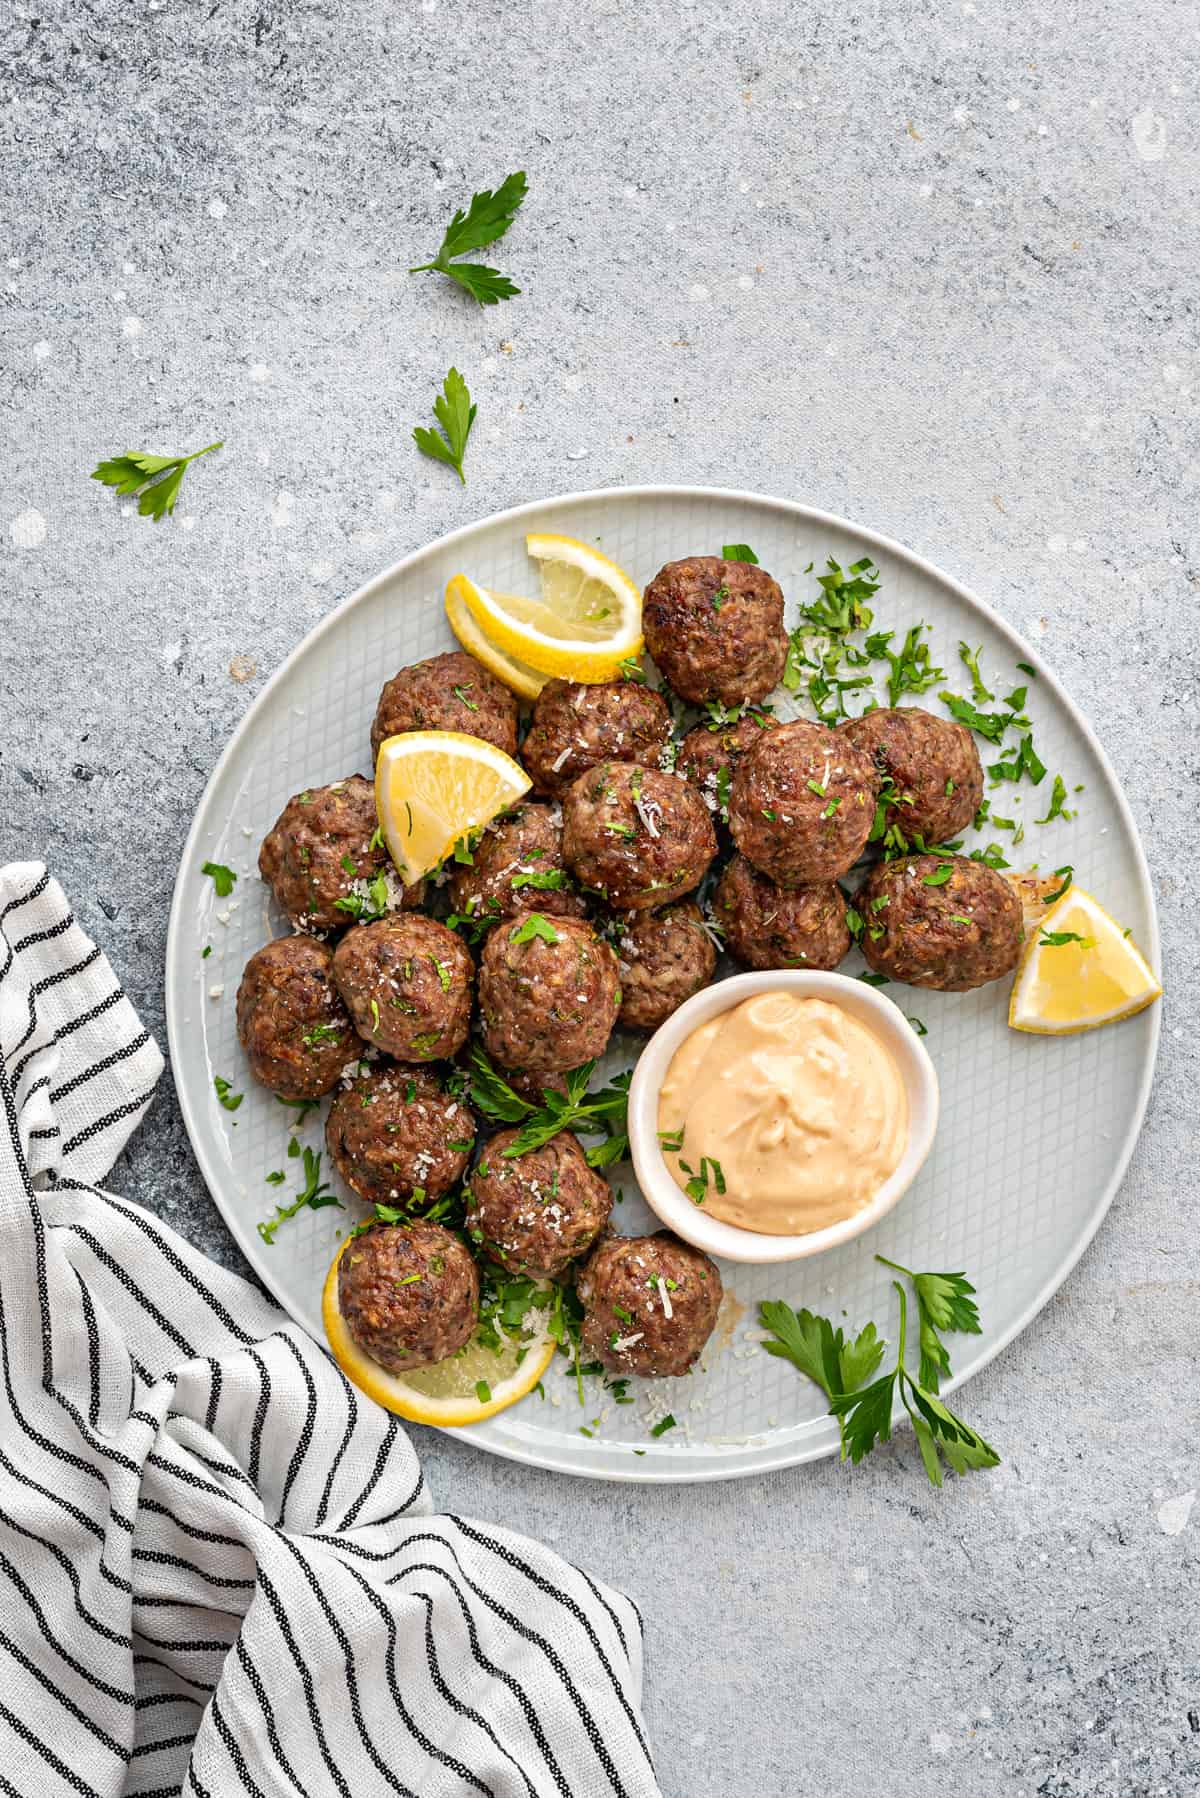 Plate with homemade baked meatballs, sprinkled with fresh parsley, lemon slices and dipping sauce in bowl.